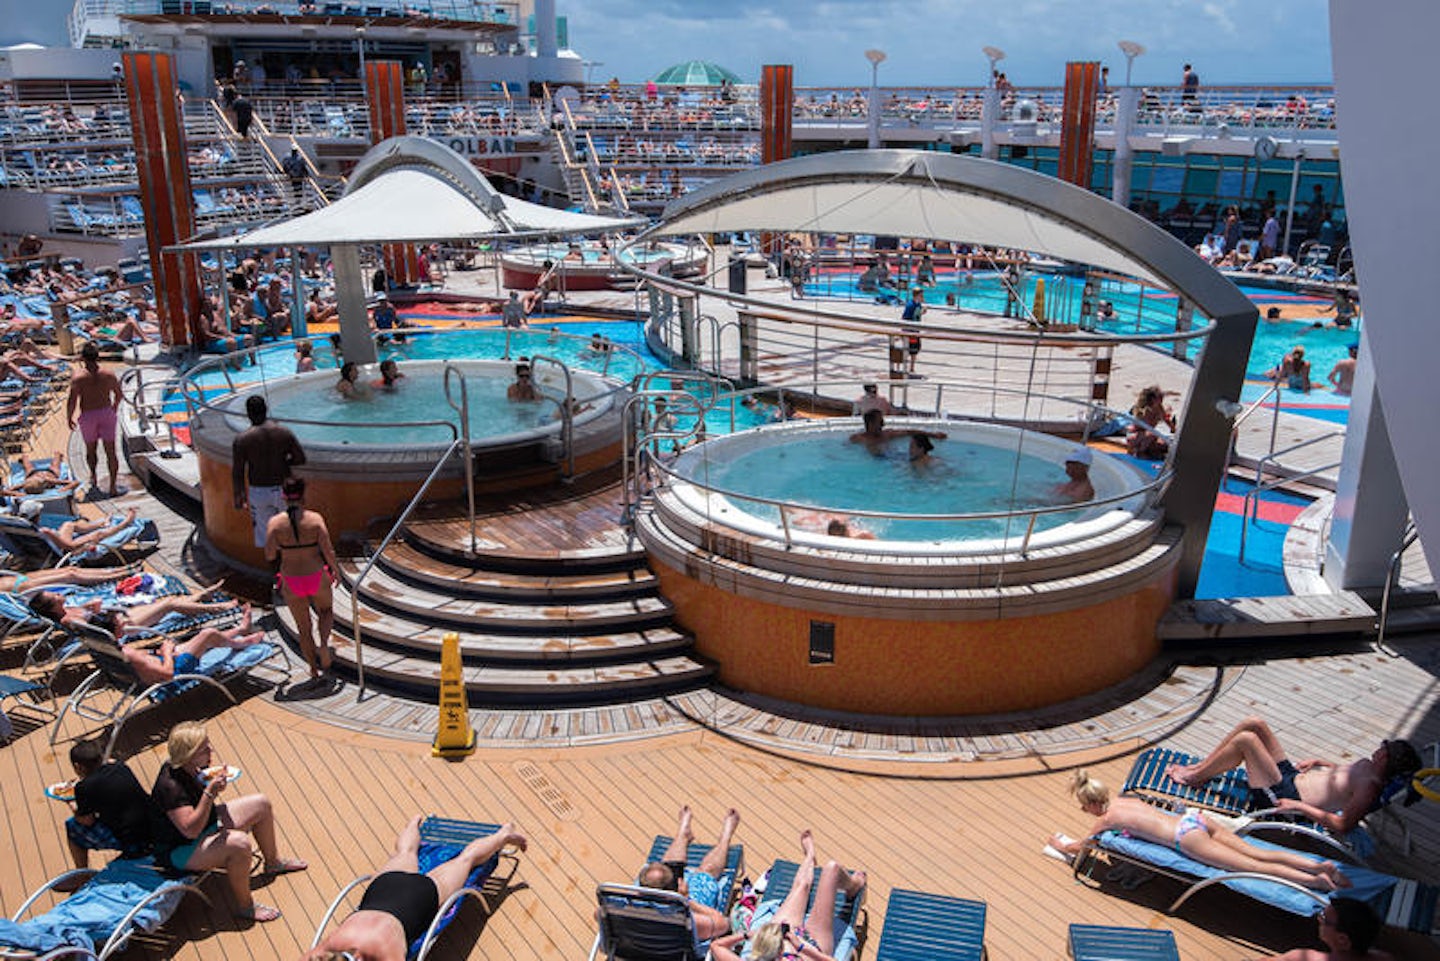 The Main Pool on Freedom of the Seas